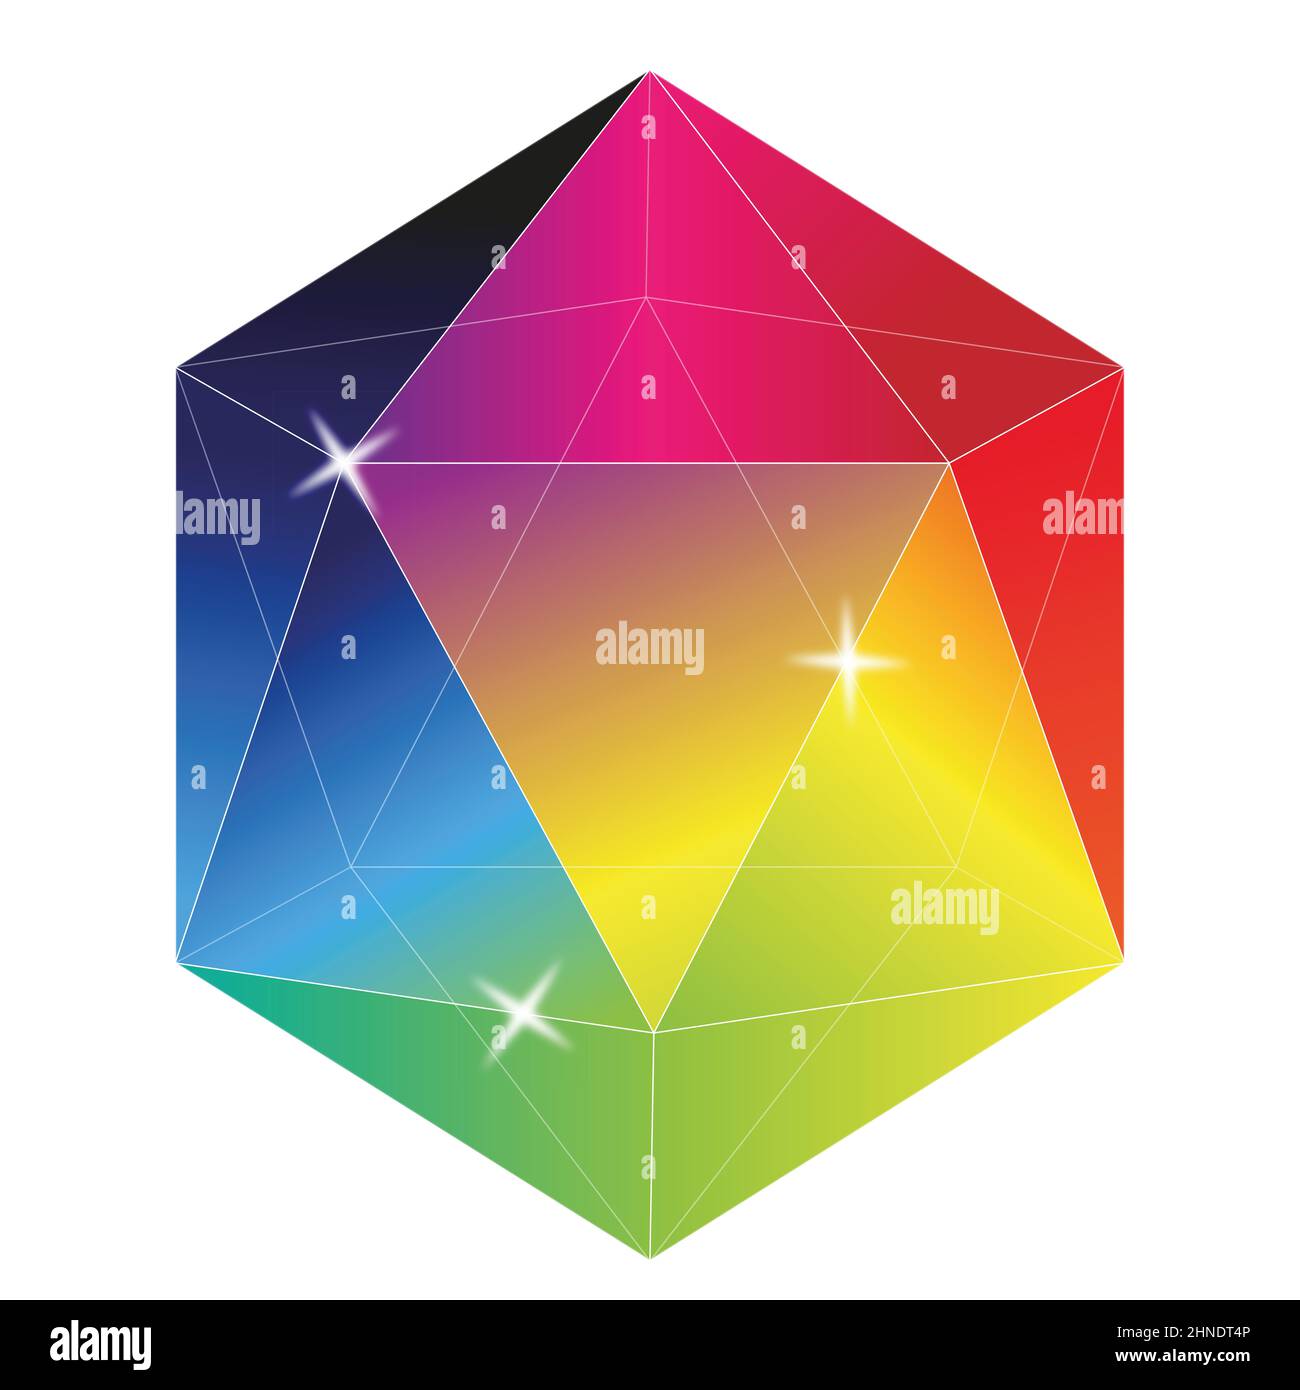 colorful prism image Stock Photo